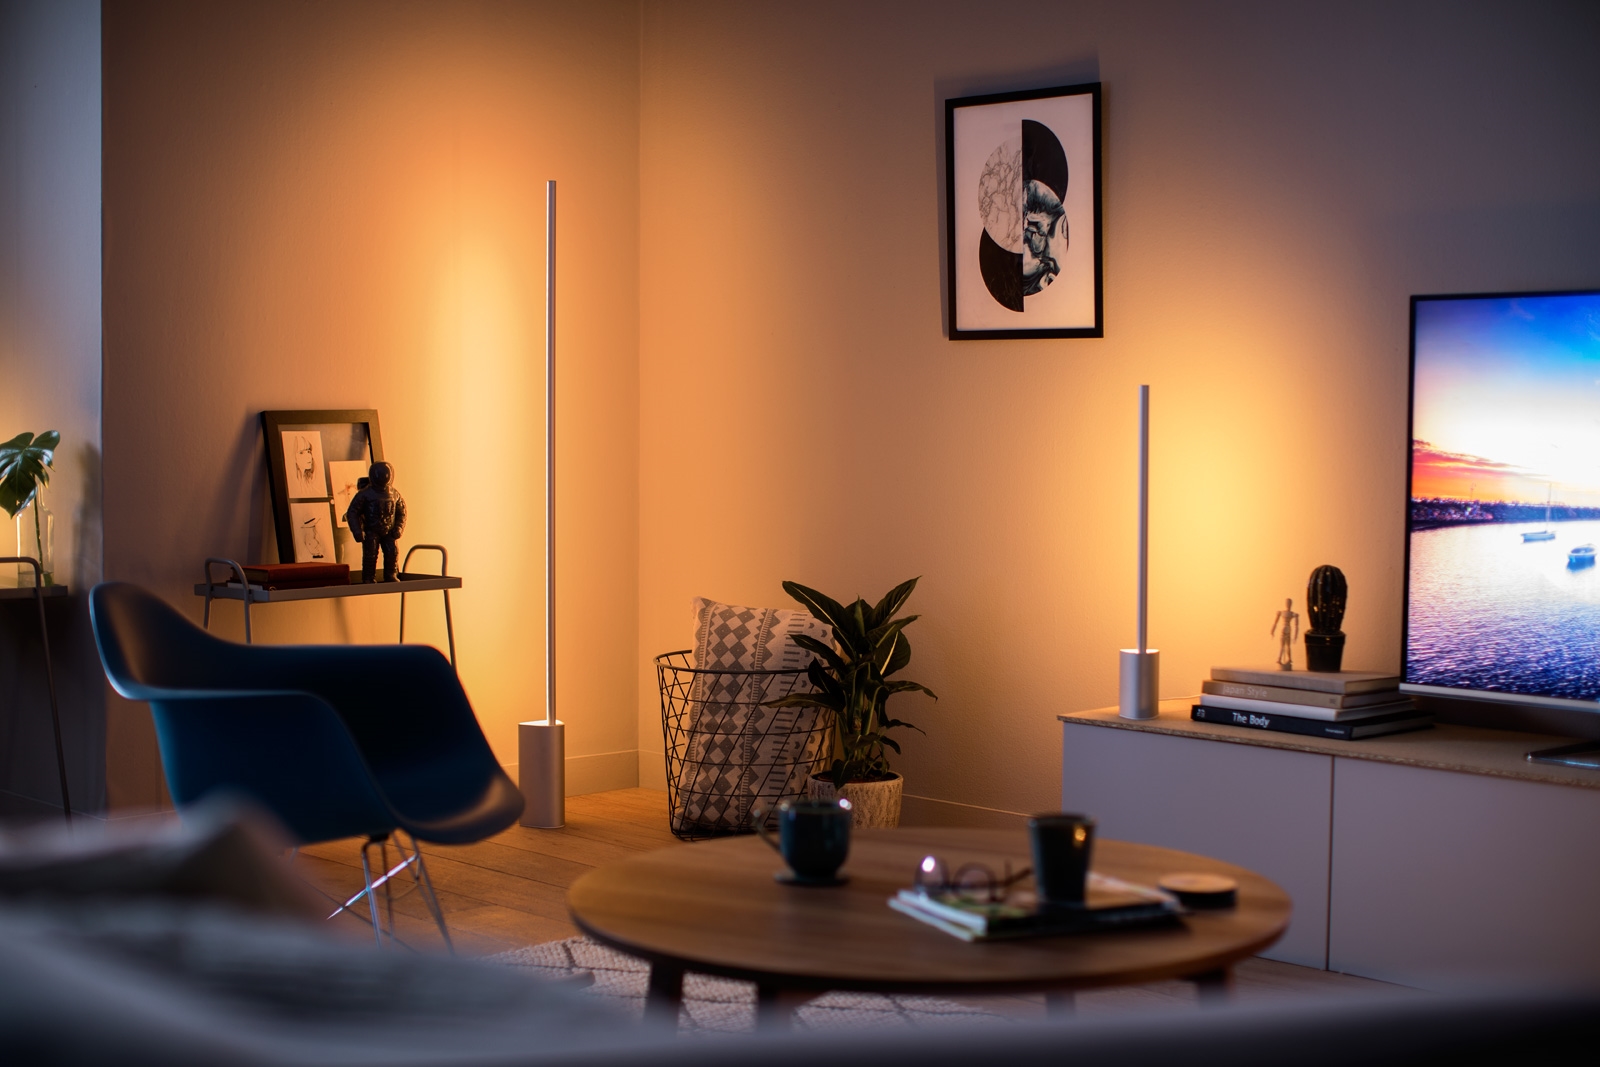 The Latest Philips Hue Lighting Kits Bring Color To Your Walls